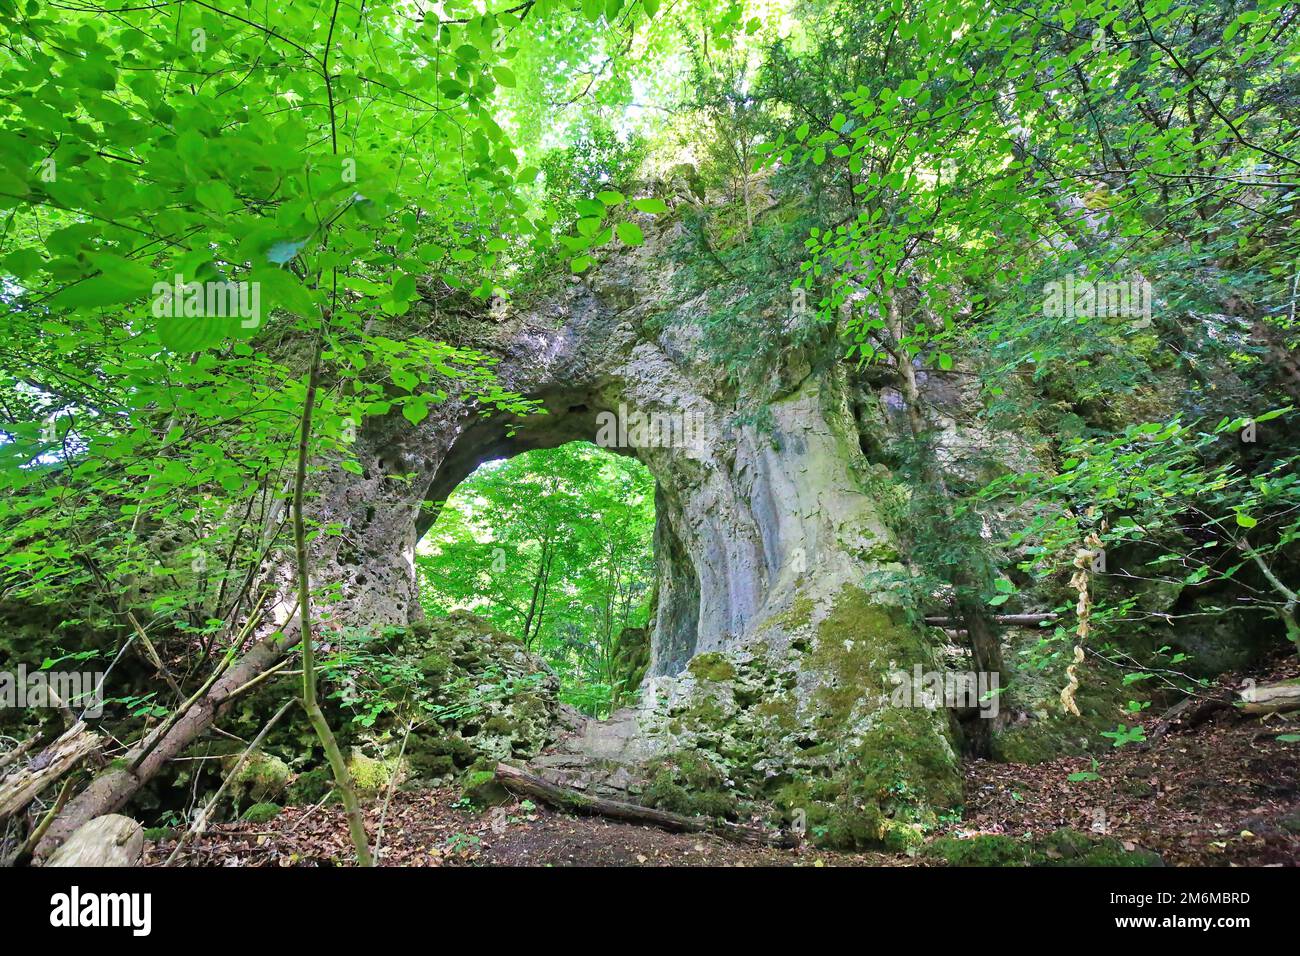 The Felsentor near GÃ¶ÃŸweinstein is a wonder of nature and was created by erosion. Stock Photo